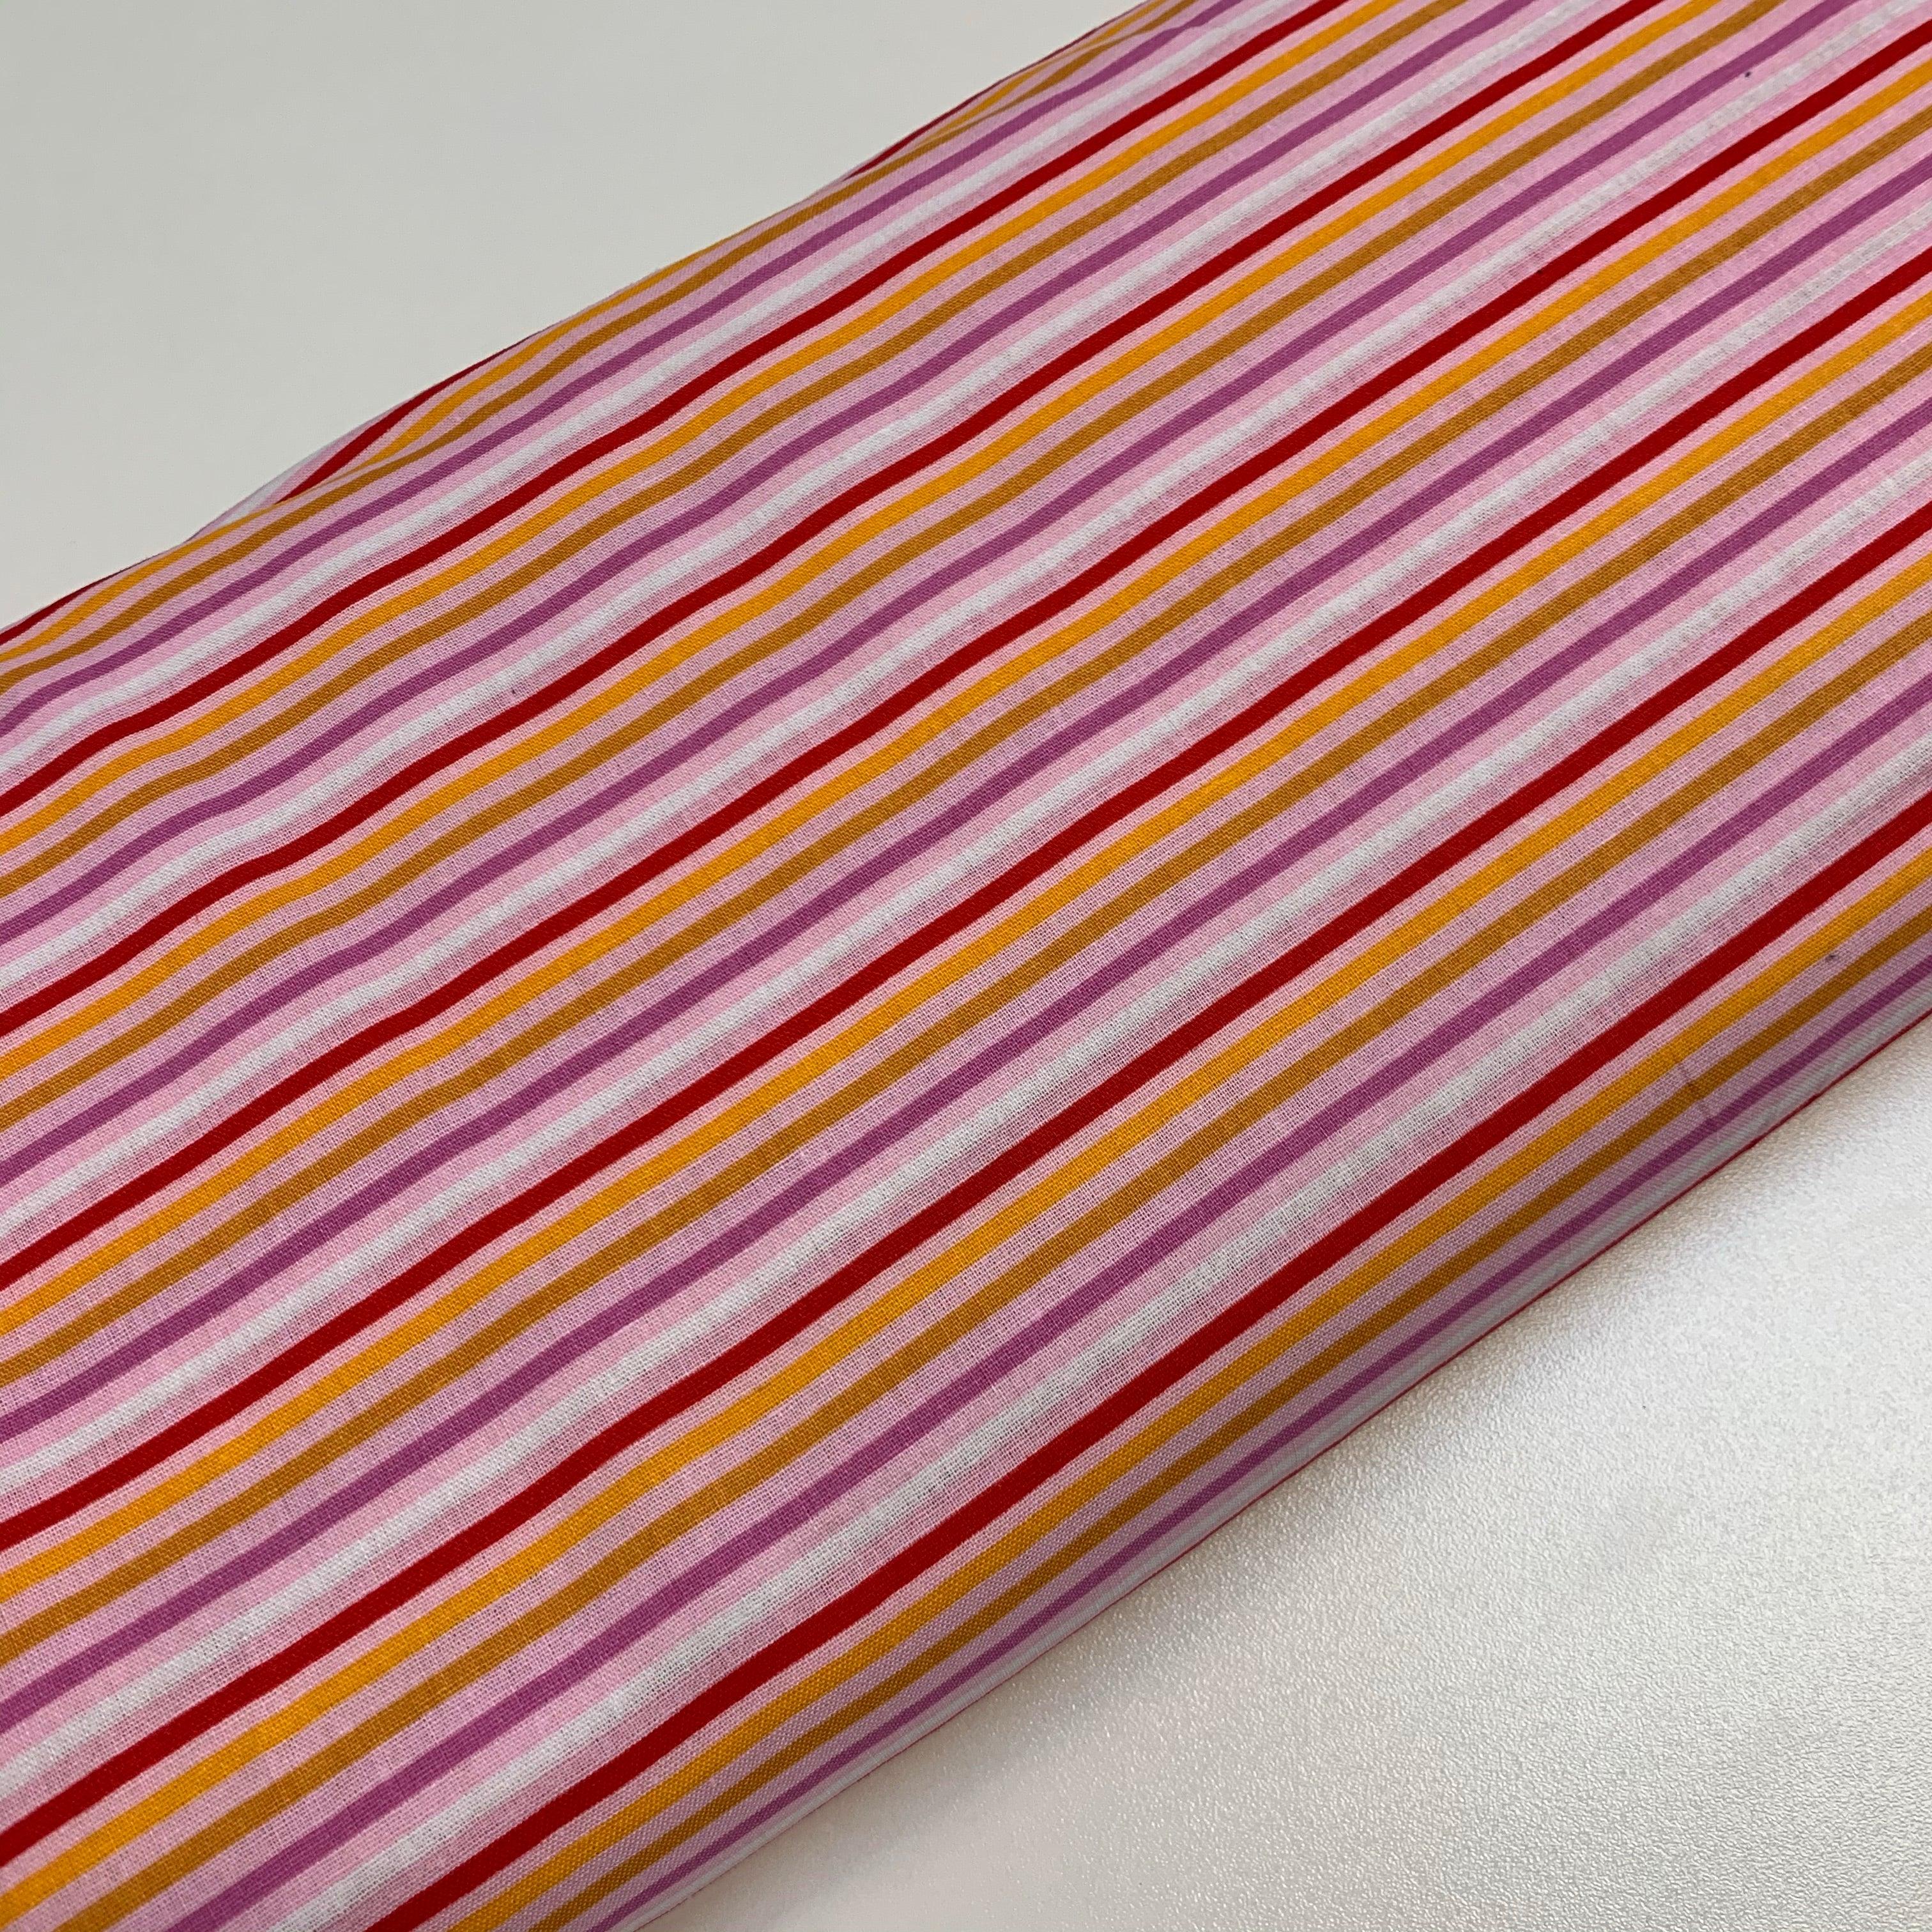 SALE Thin Red/pink/yellow stripes 100% Cotton